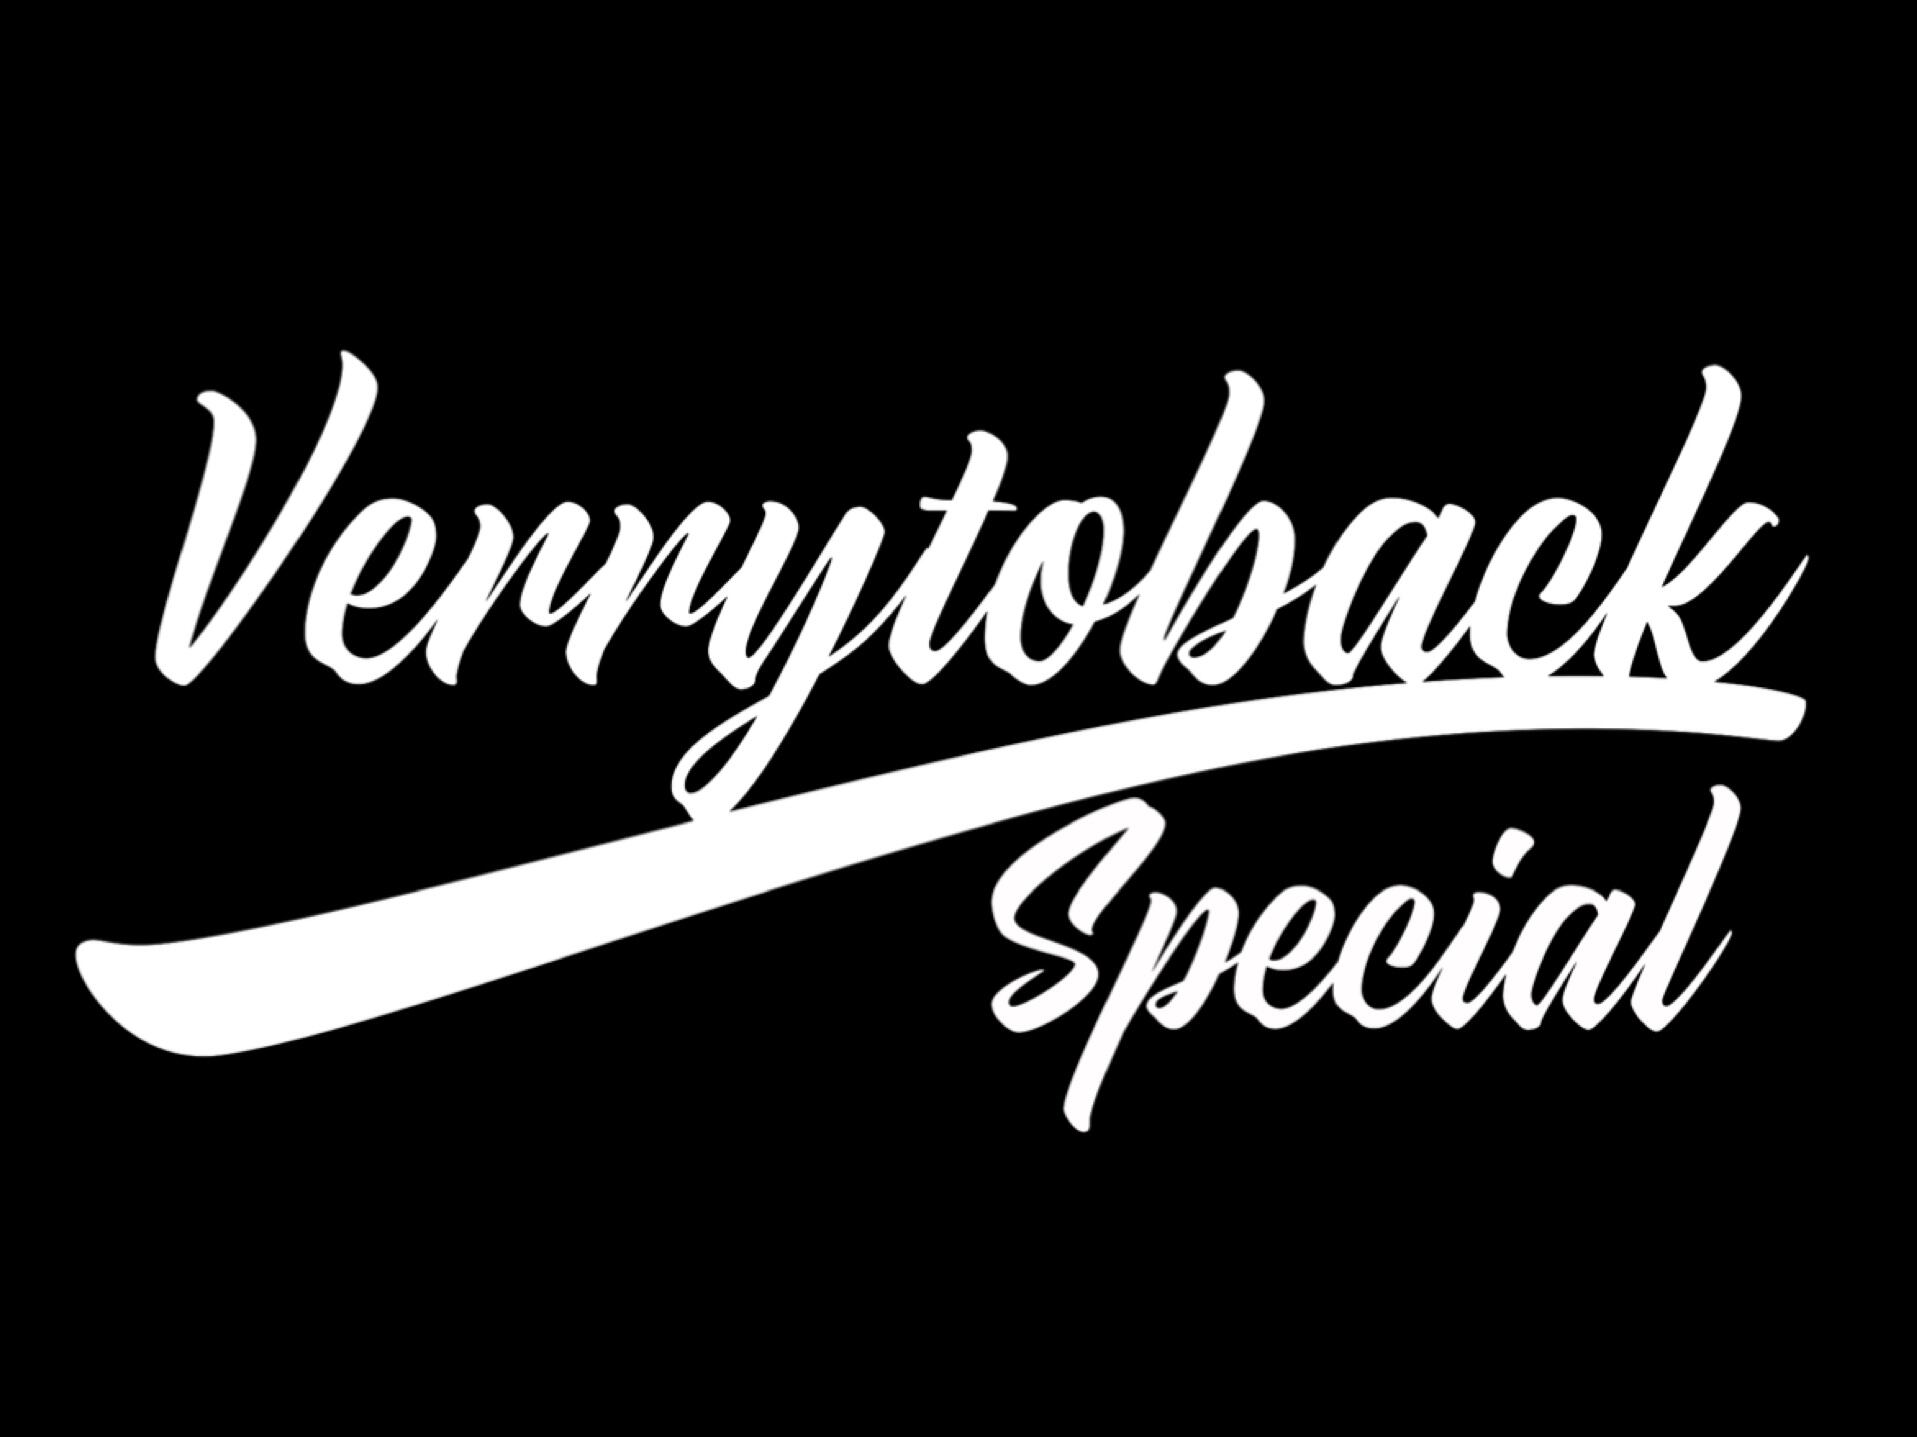 VERRY TO BACK SPECIAL